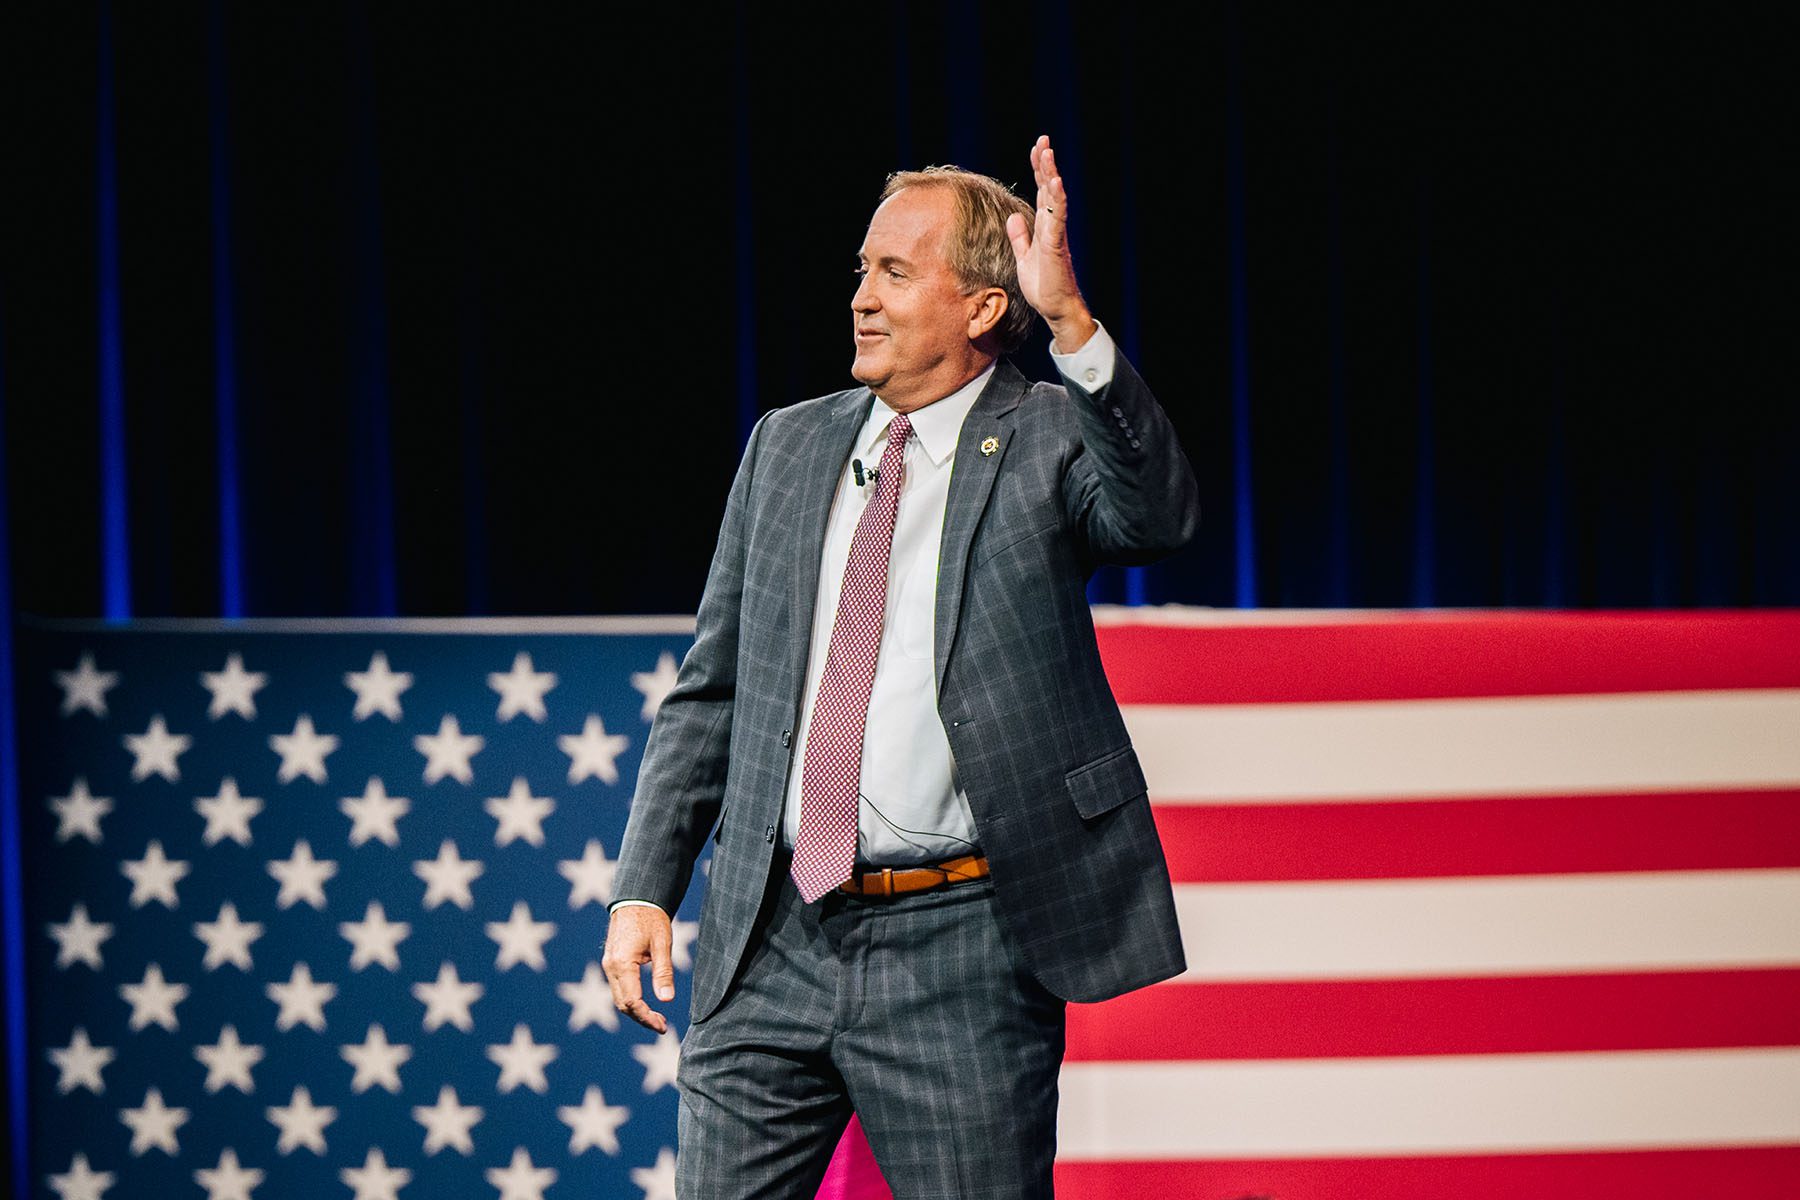 Ken Paxton waves after giving a speech. Behind him is a large American flag.